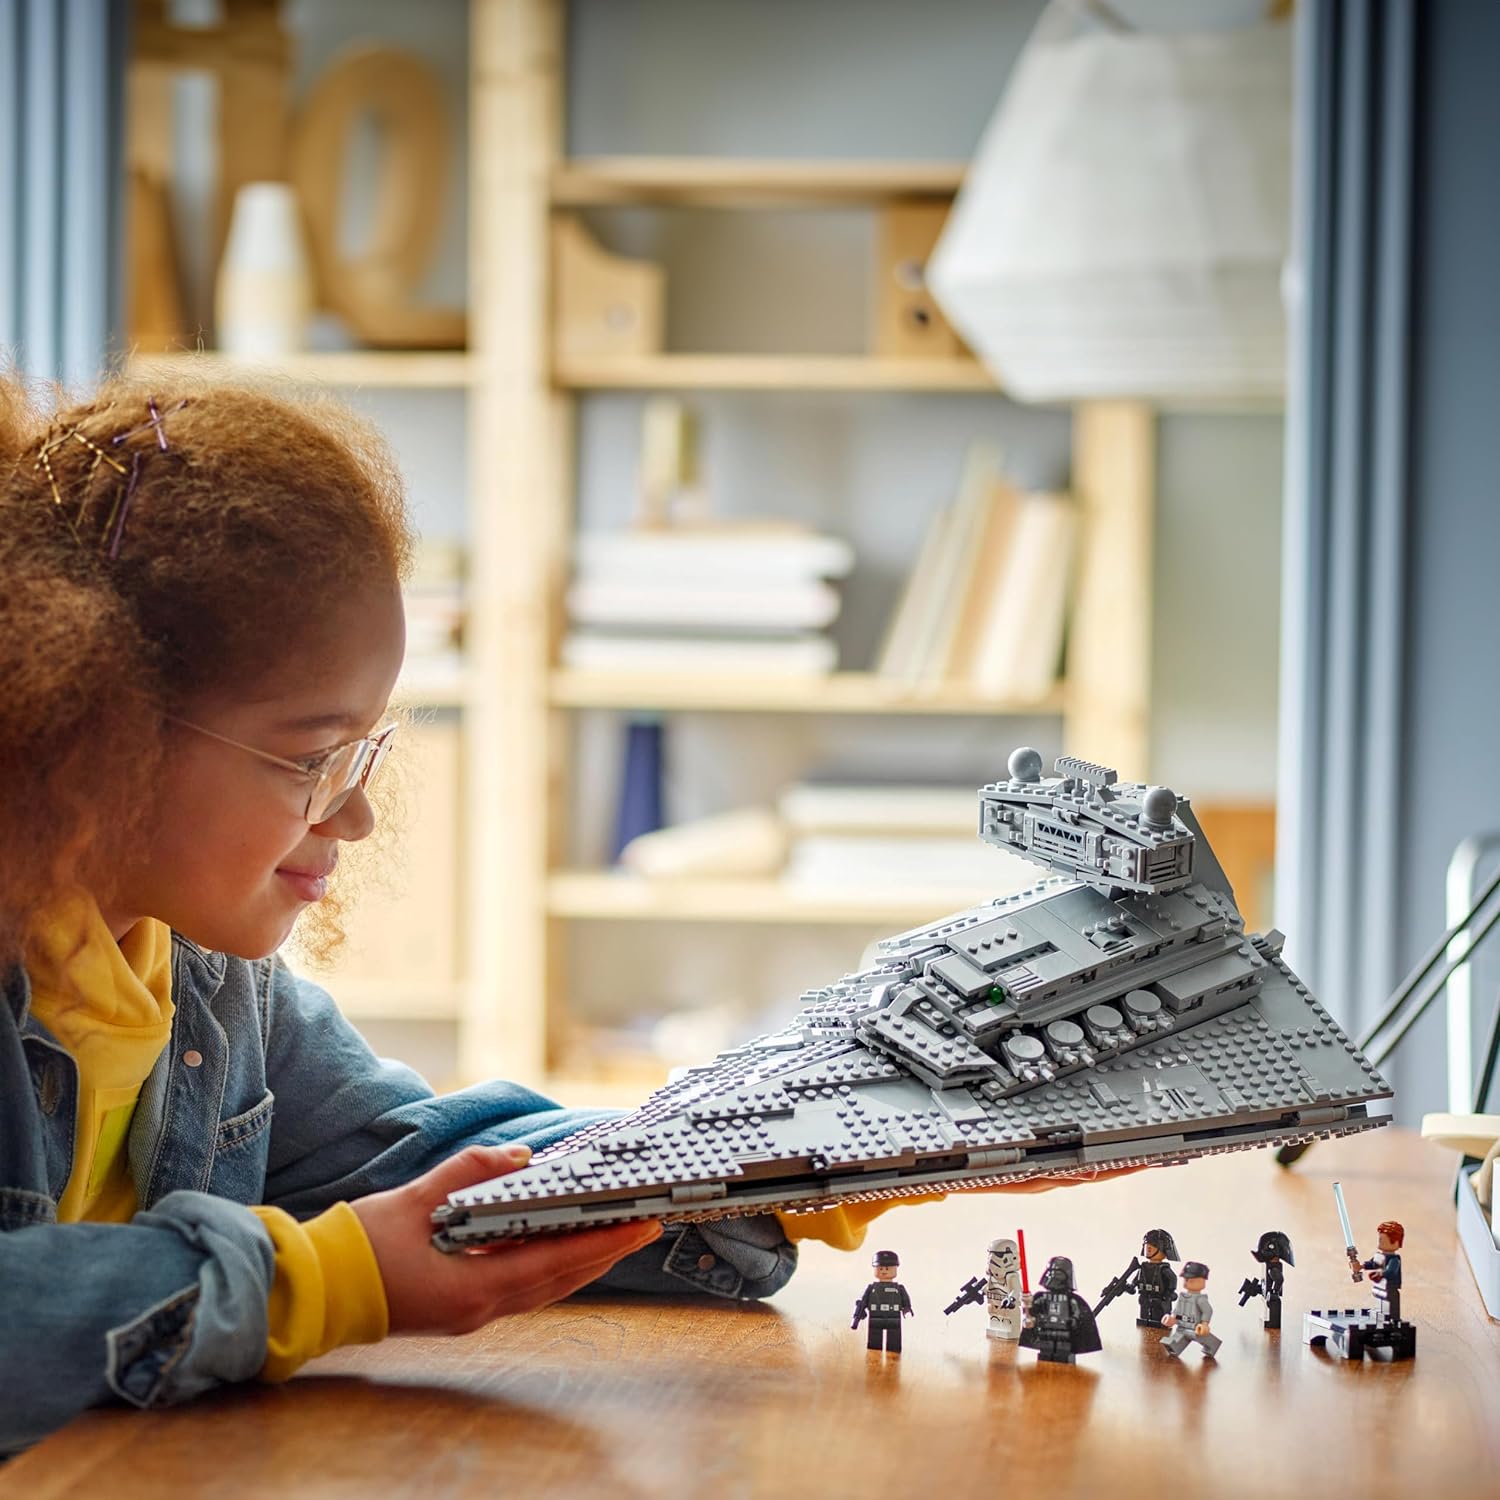 A young girl holds up a completed Lego Star Destroyer, showing the iconic Star Wars ship in Lego form.  Seven minifigure characters are on the desk beneath the toy.